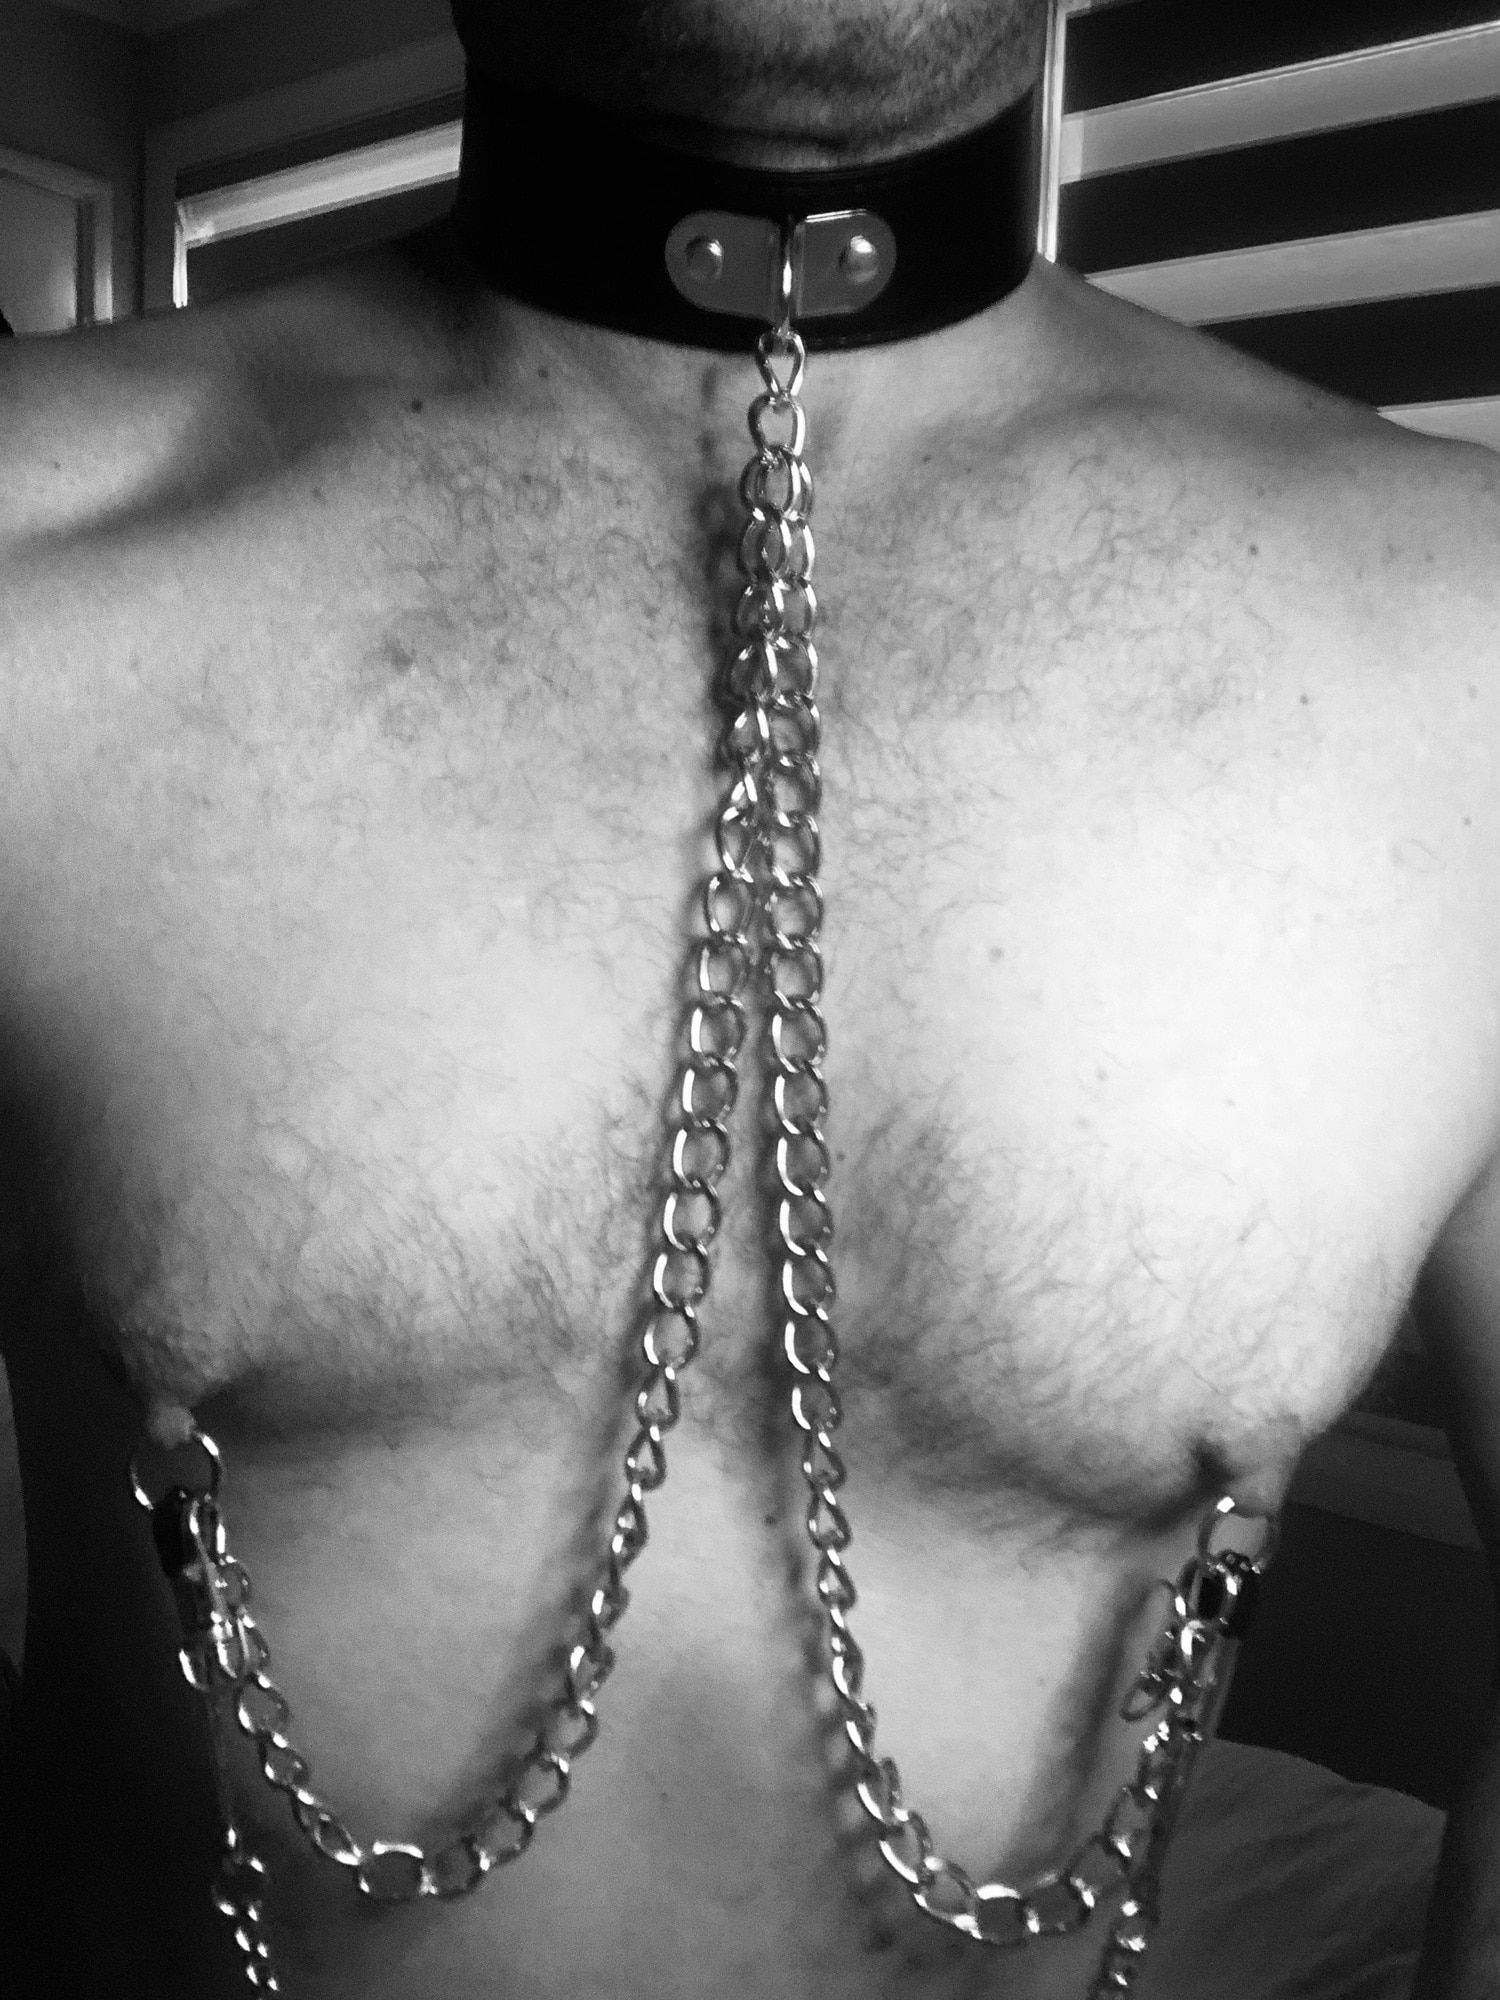 Restrained to be used by you 